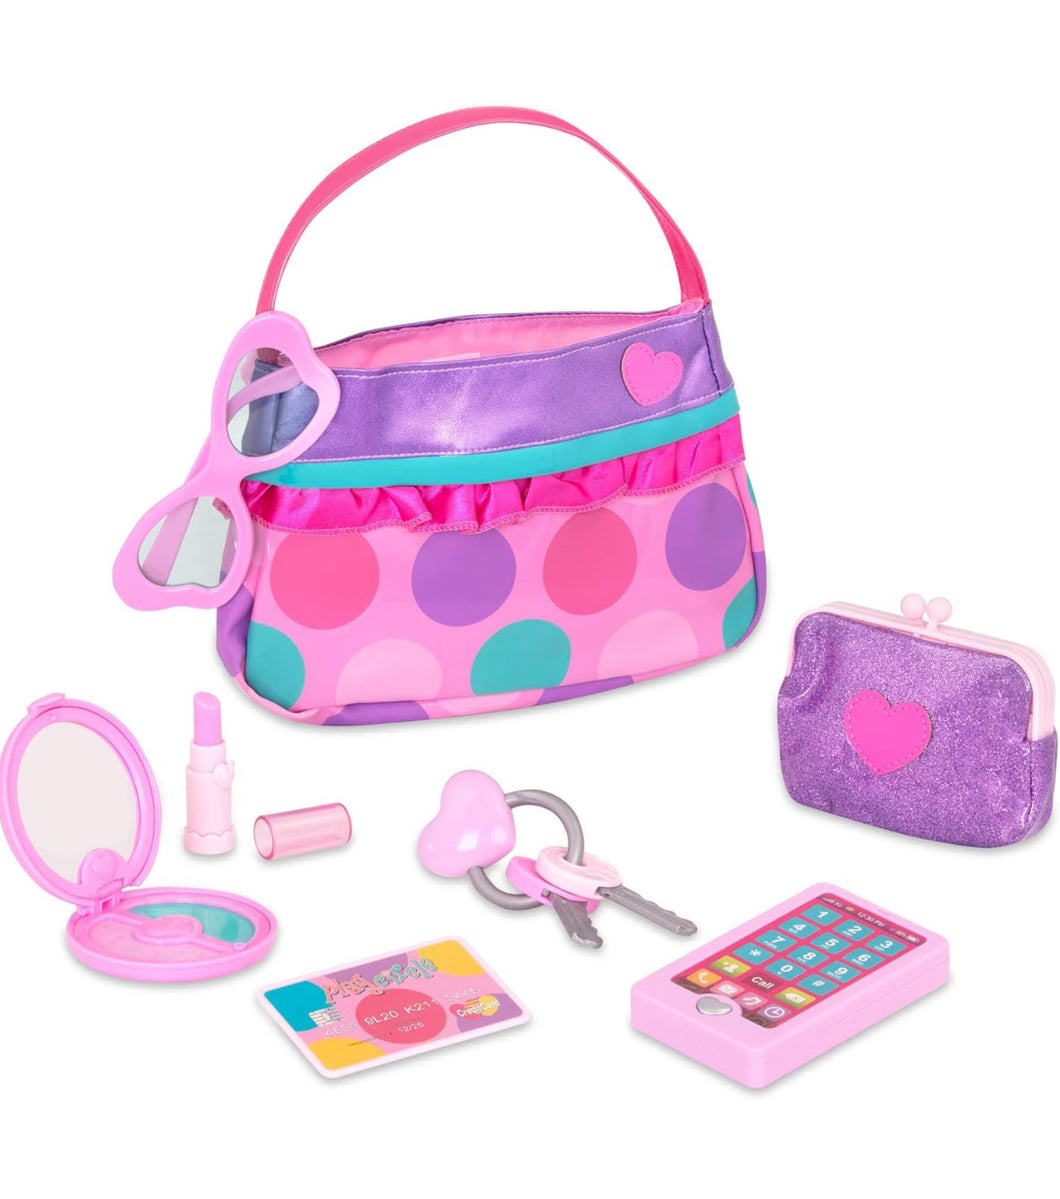 Pretend Play Purse and Accessories